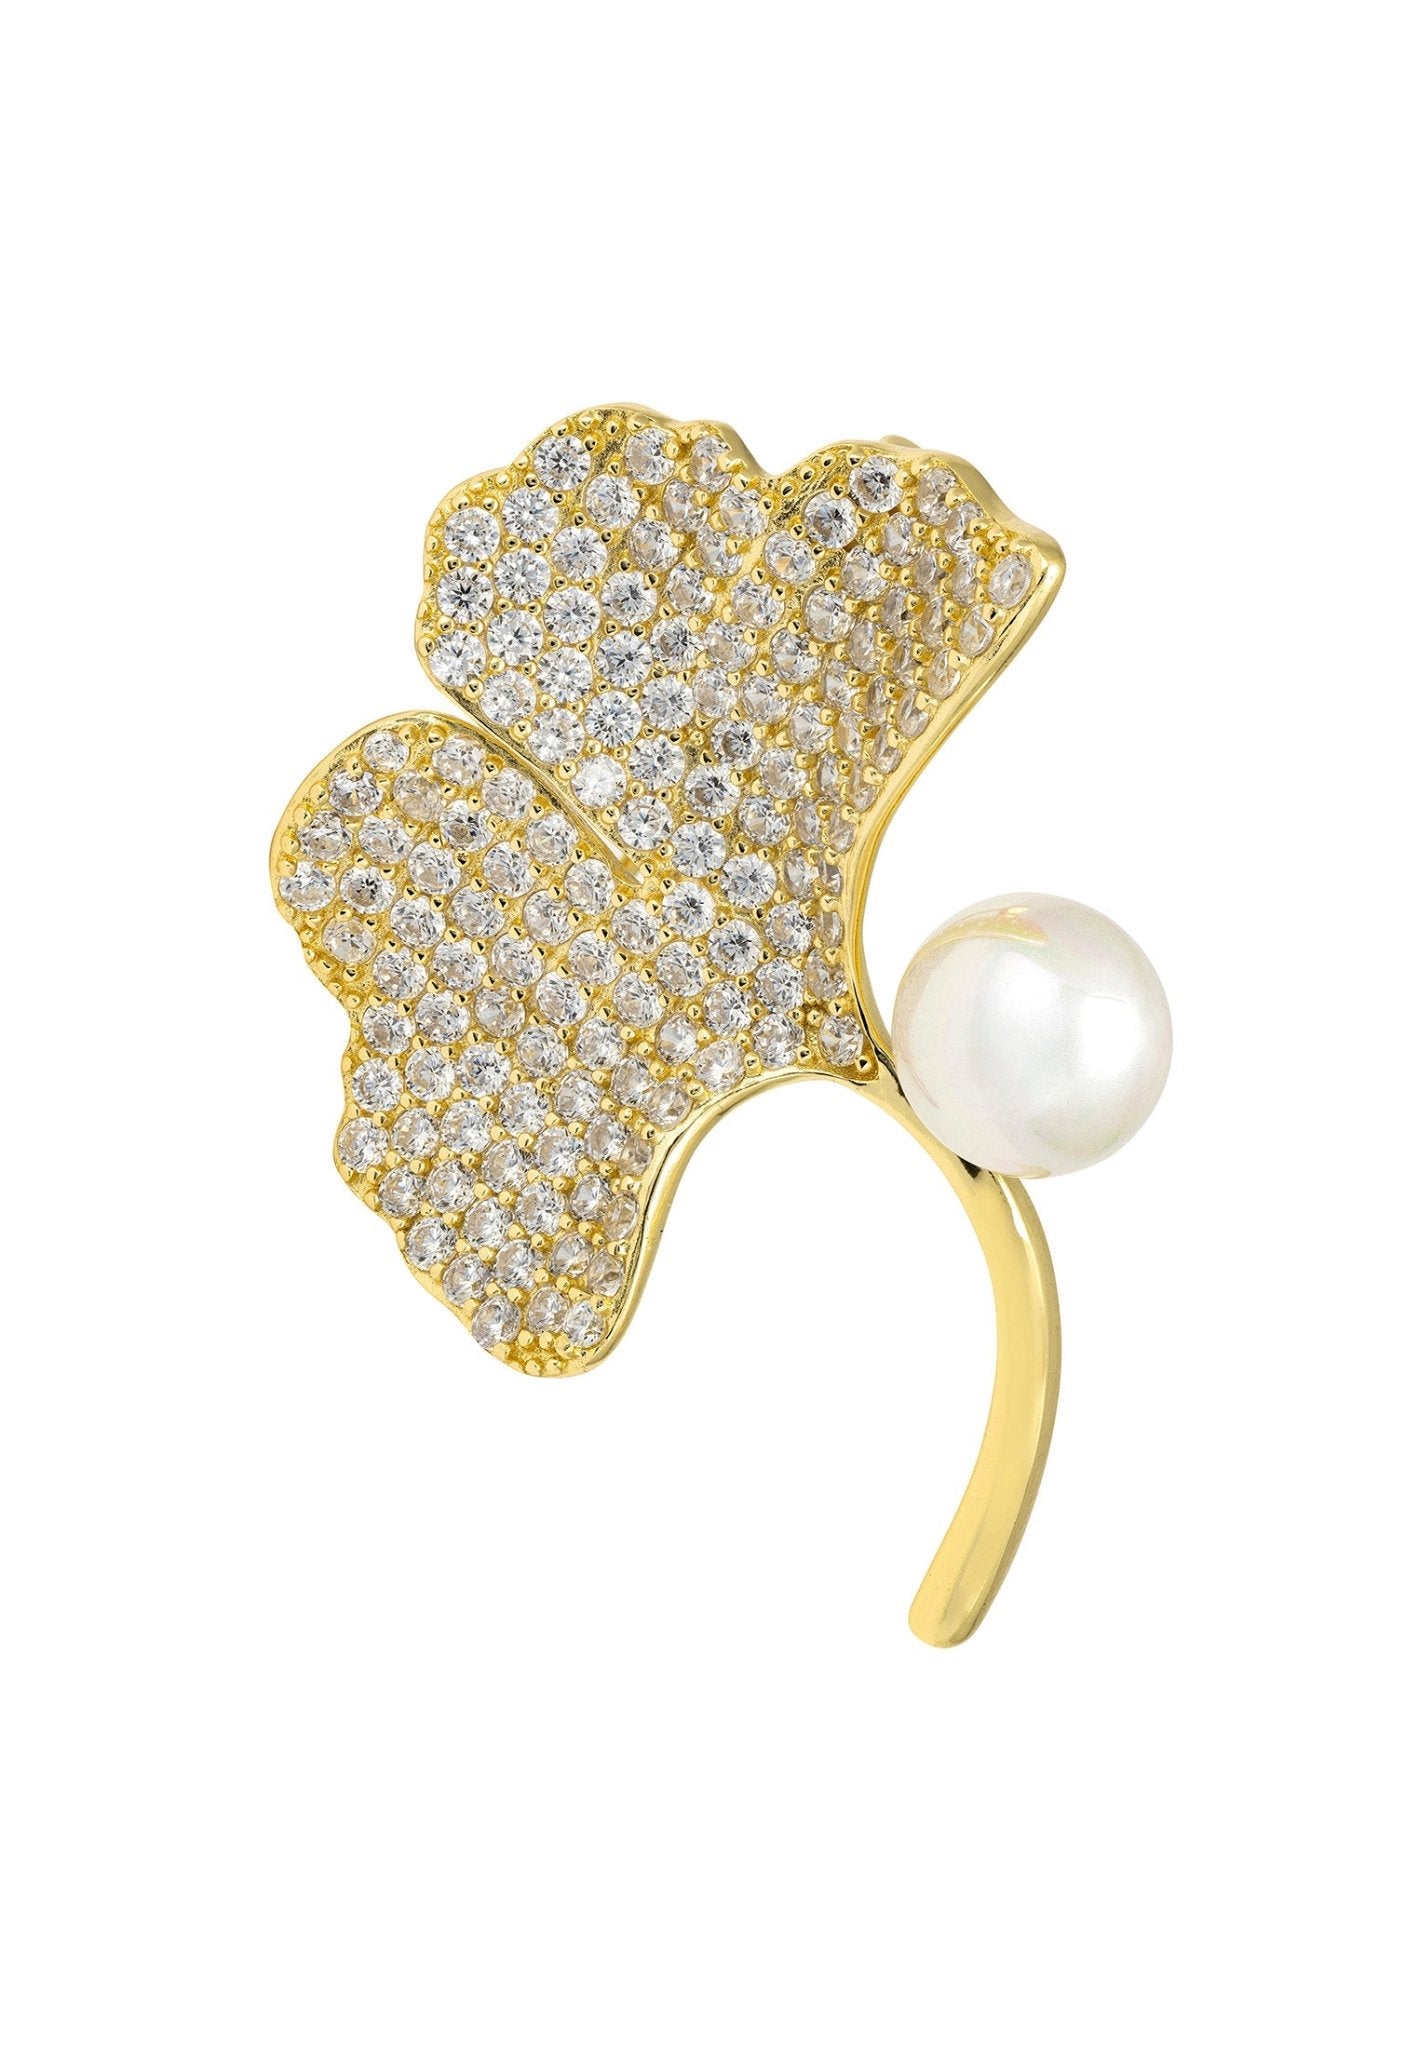 Ginkgo Leaf And Pearl Brooch Gold - LATELITA Brooches